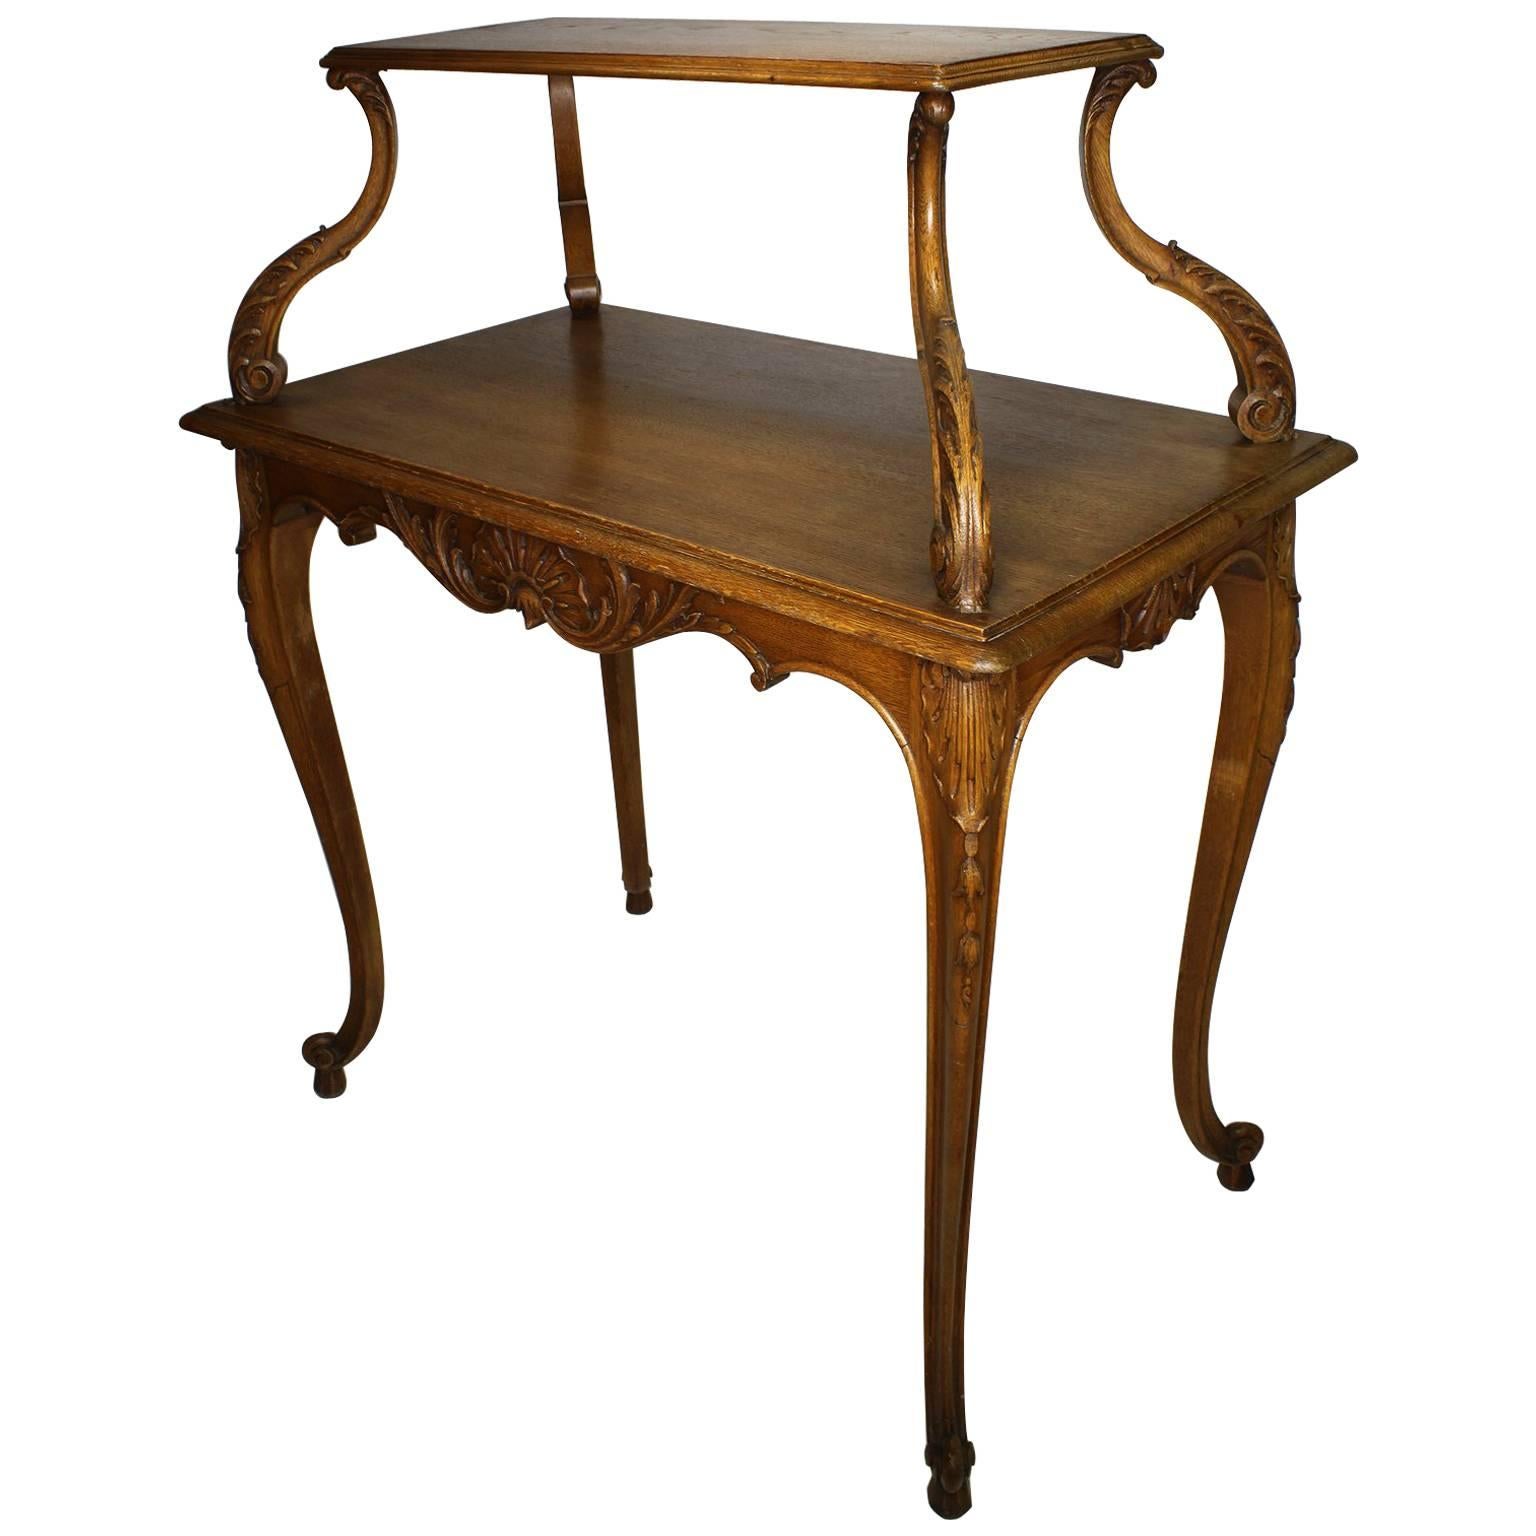 French 19th-20th Century Louis XV Style Carved Oak Two-Tier Tea or Dessert Table For Sale